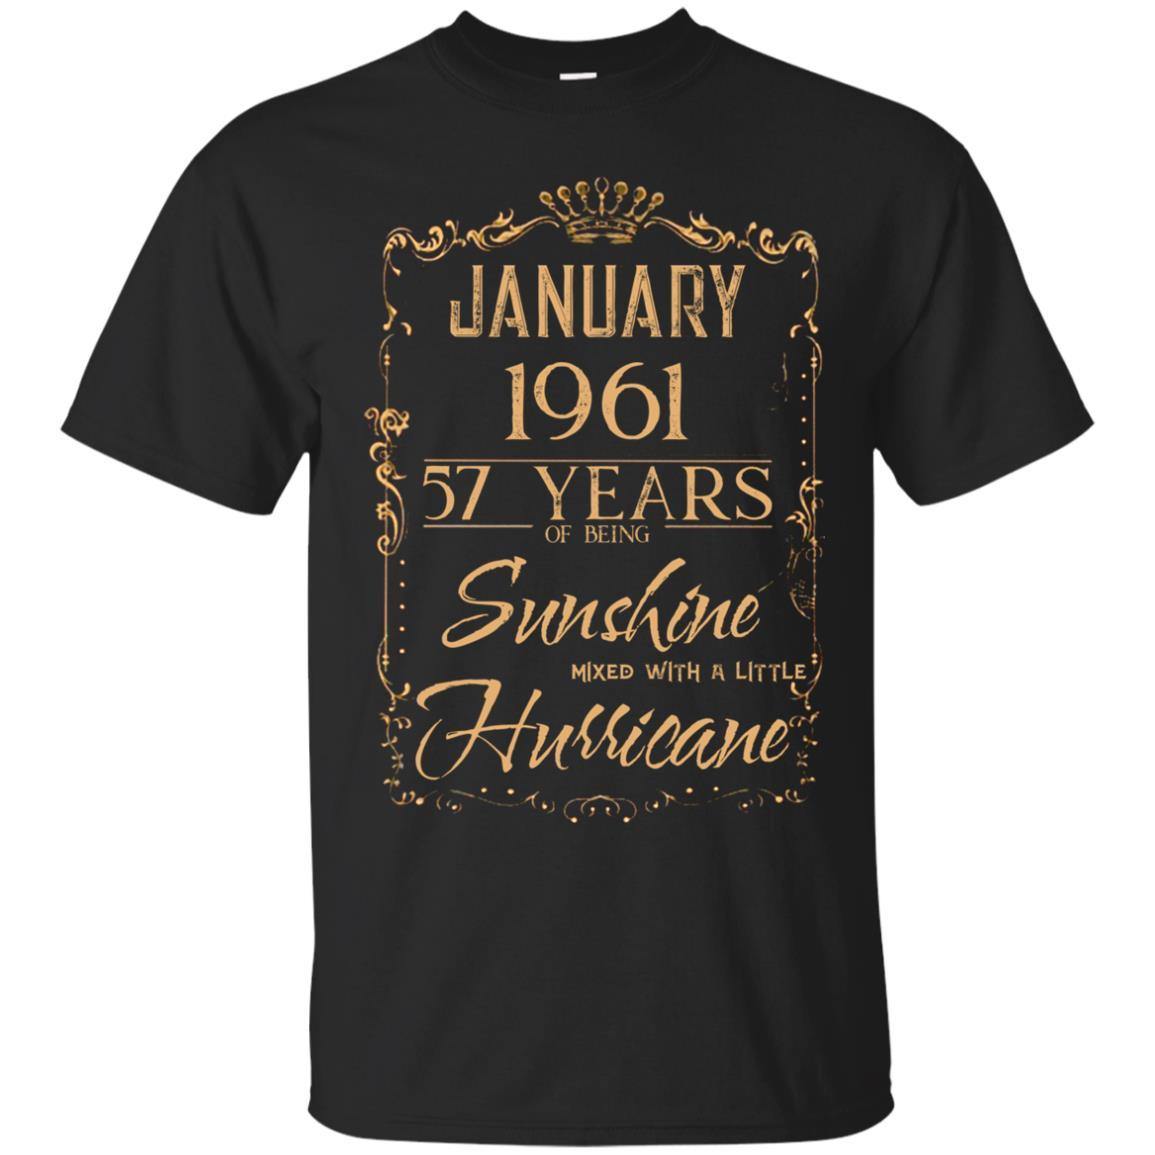 January 1961 57 Years Of Being Sunshine Mixed With A Little Hurricane Shirts